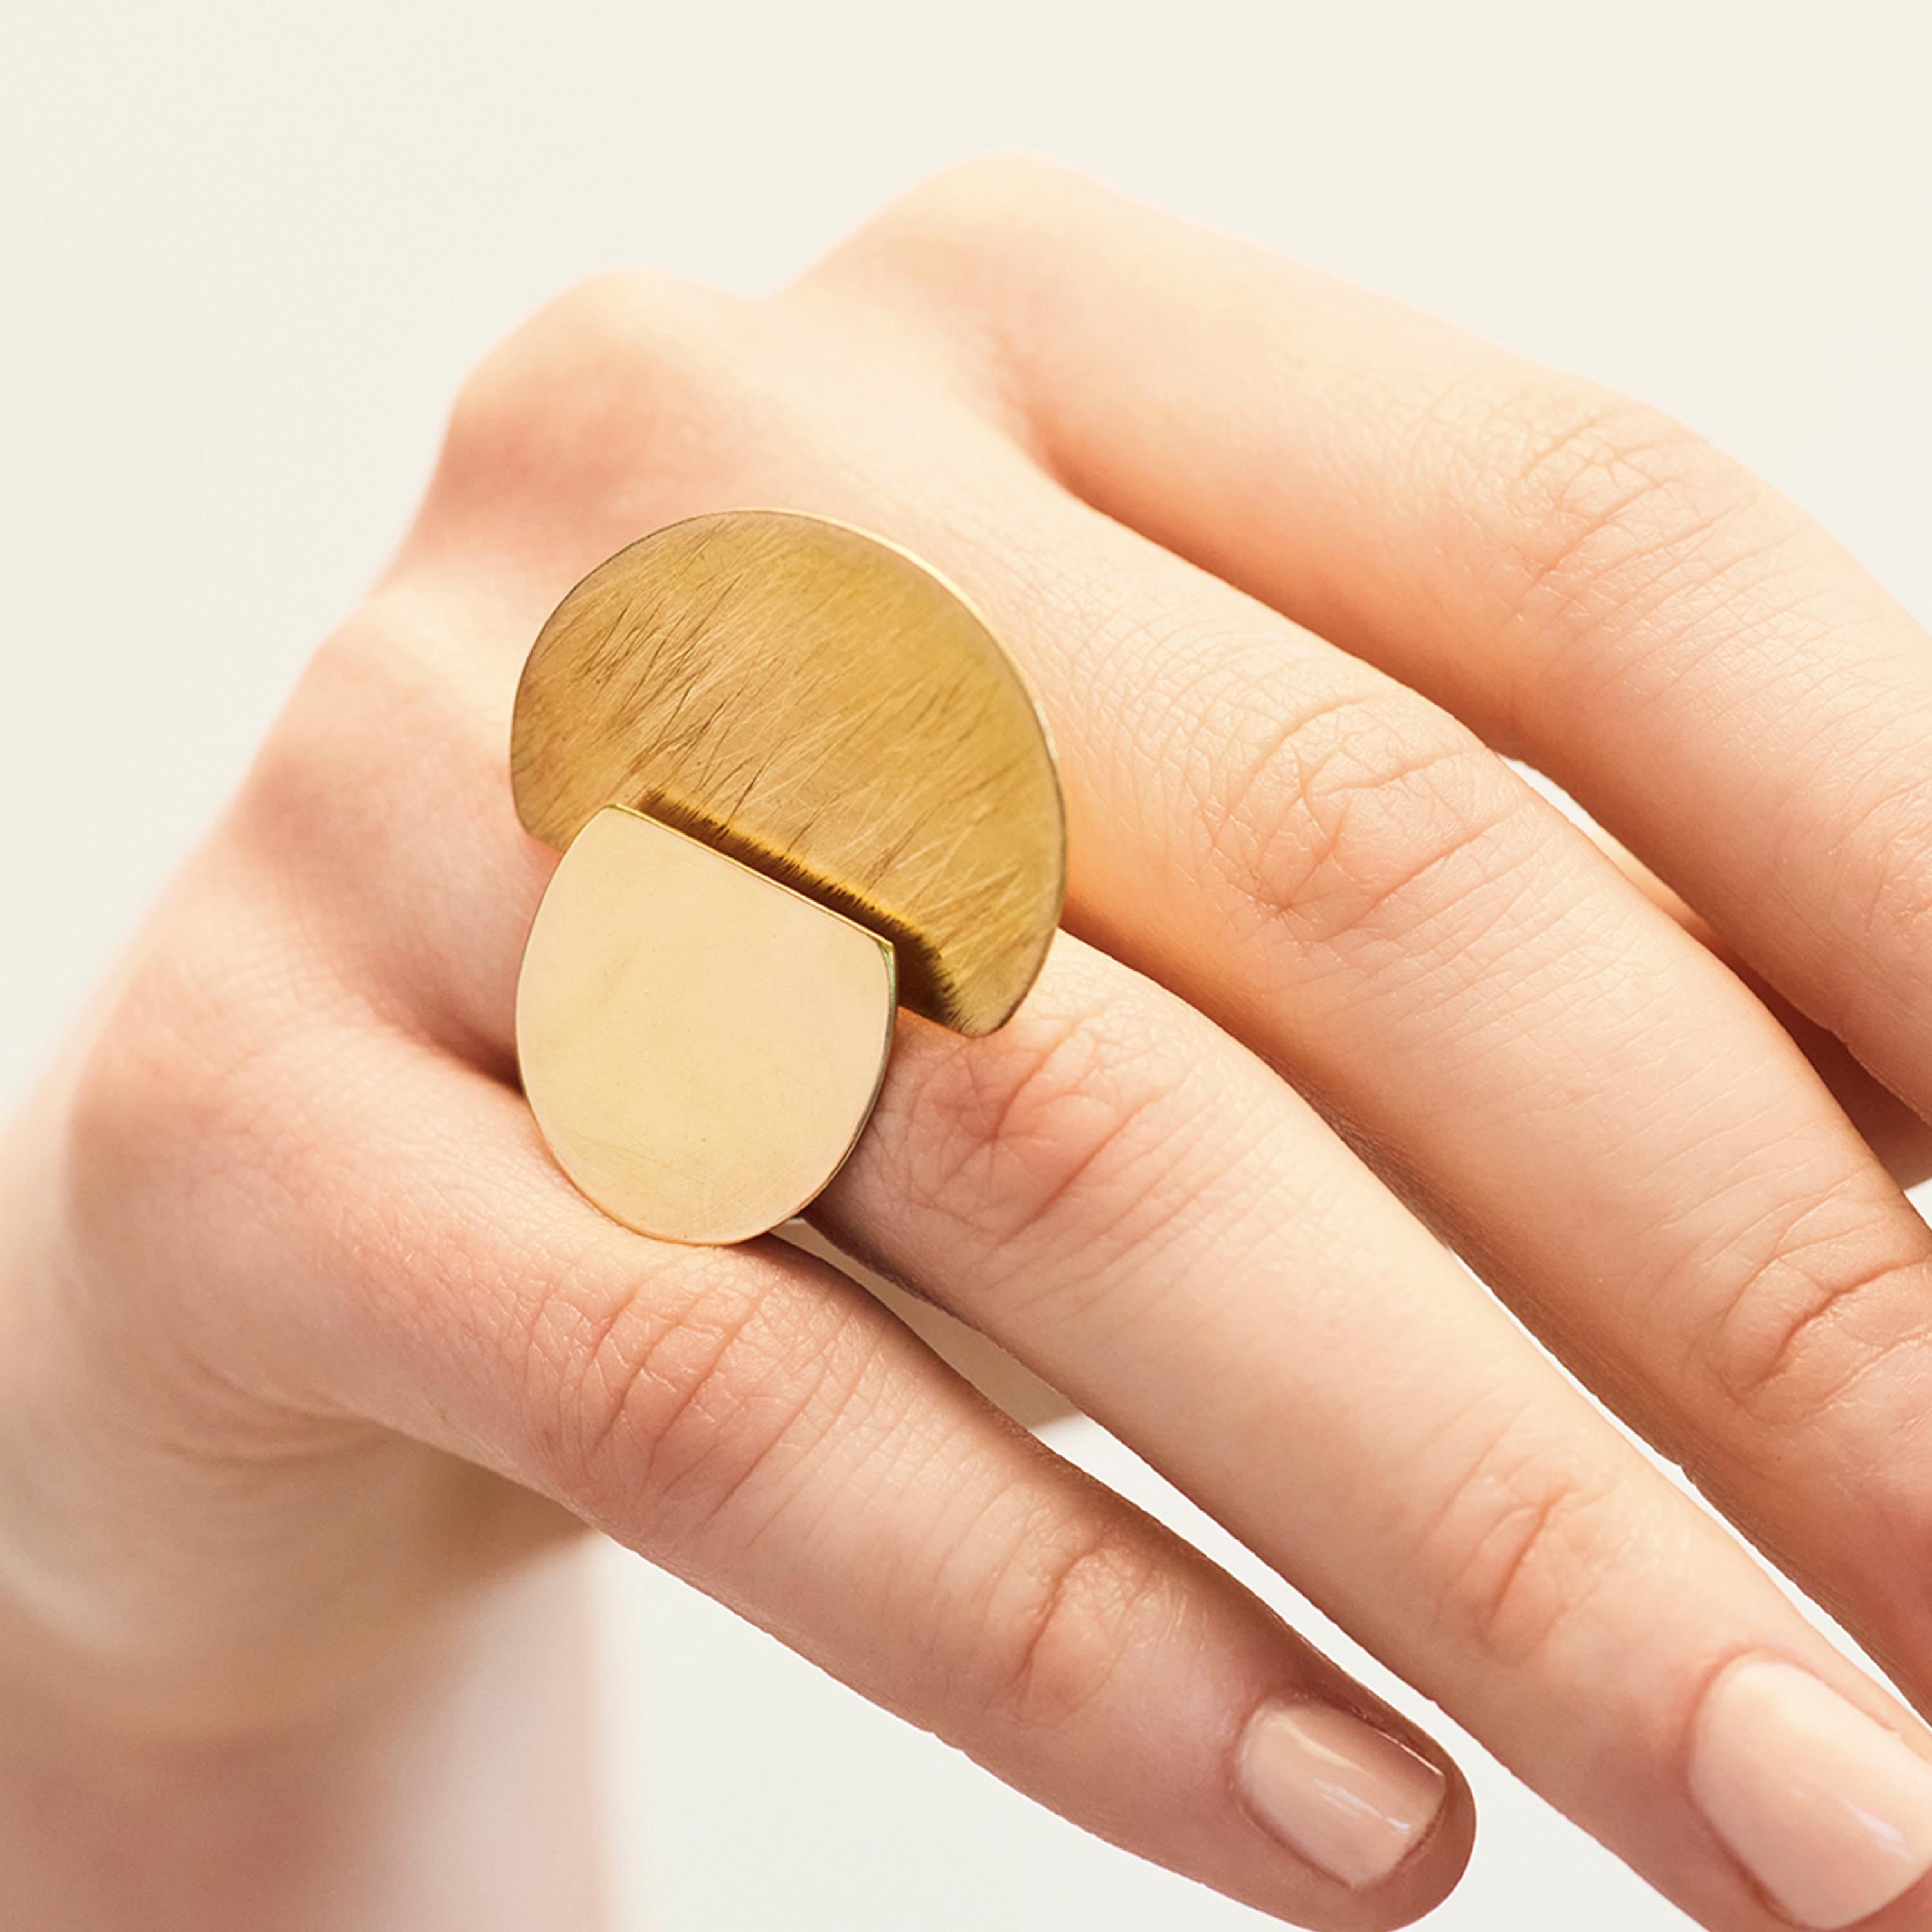 Catherine Le Gal’s Half Moon ring is created from 18 karat yellow gold. Its surface is matt with a delicate texture, complimenting the form of this piece. This ring is a size 56.  

Catherine Le Gal is interested in contrasts, jewels that are